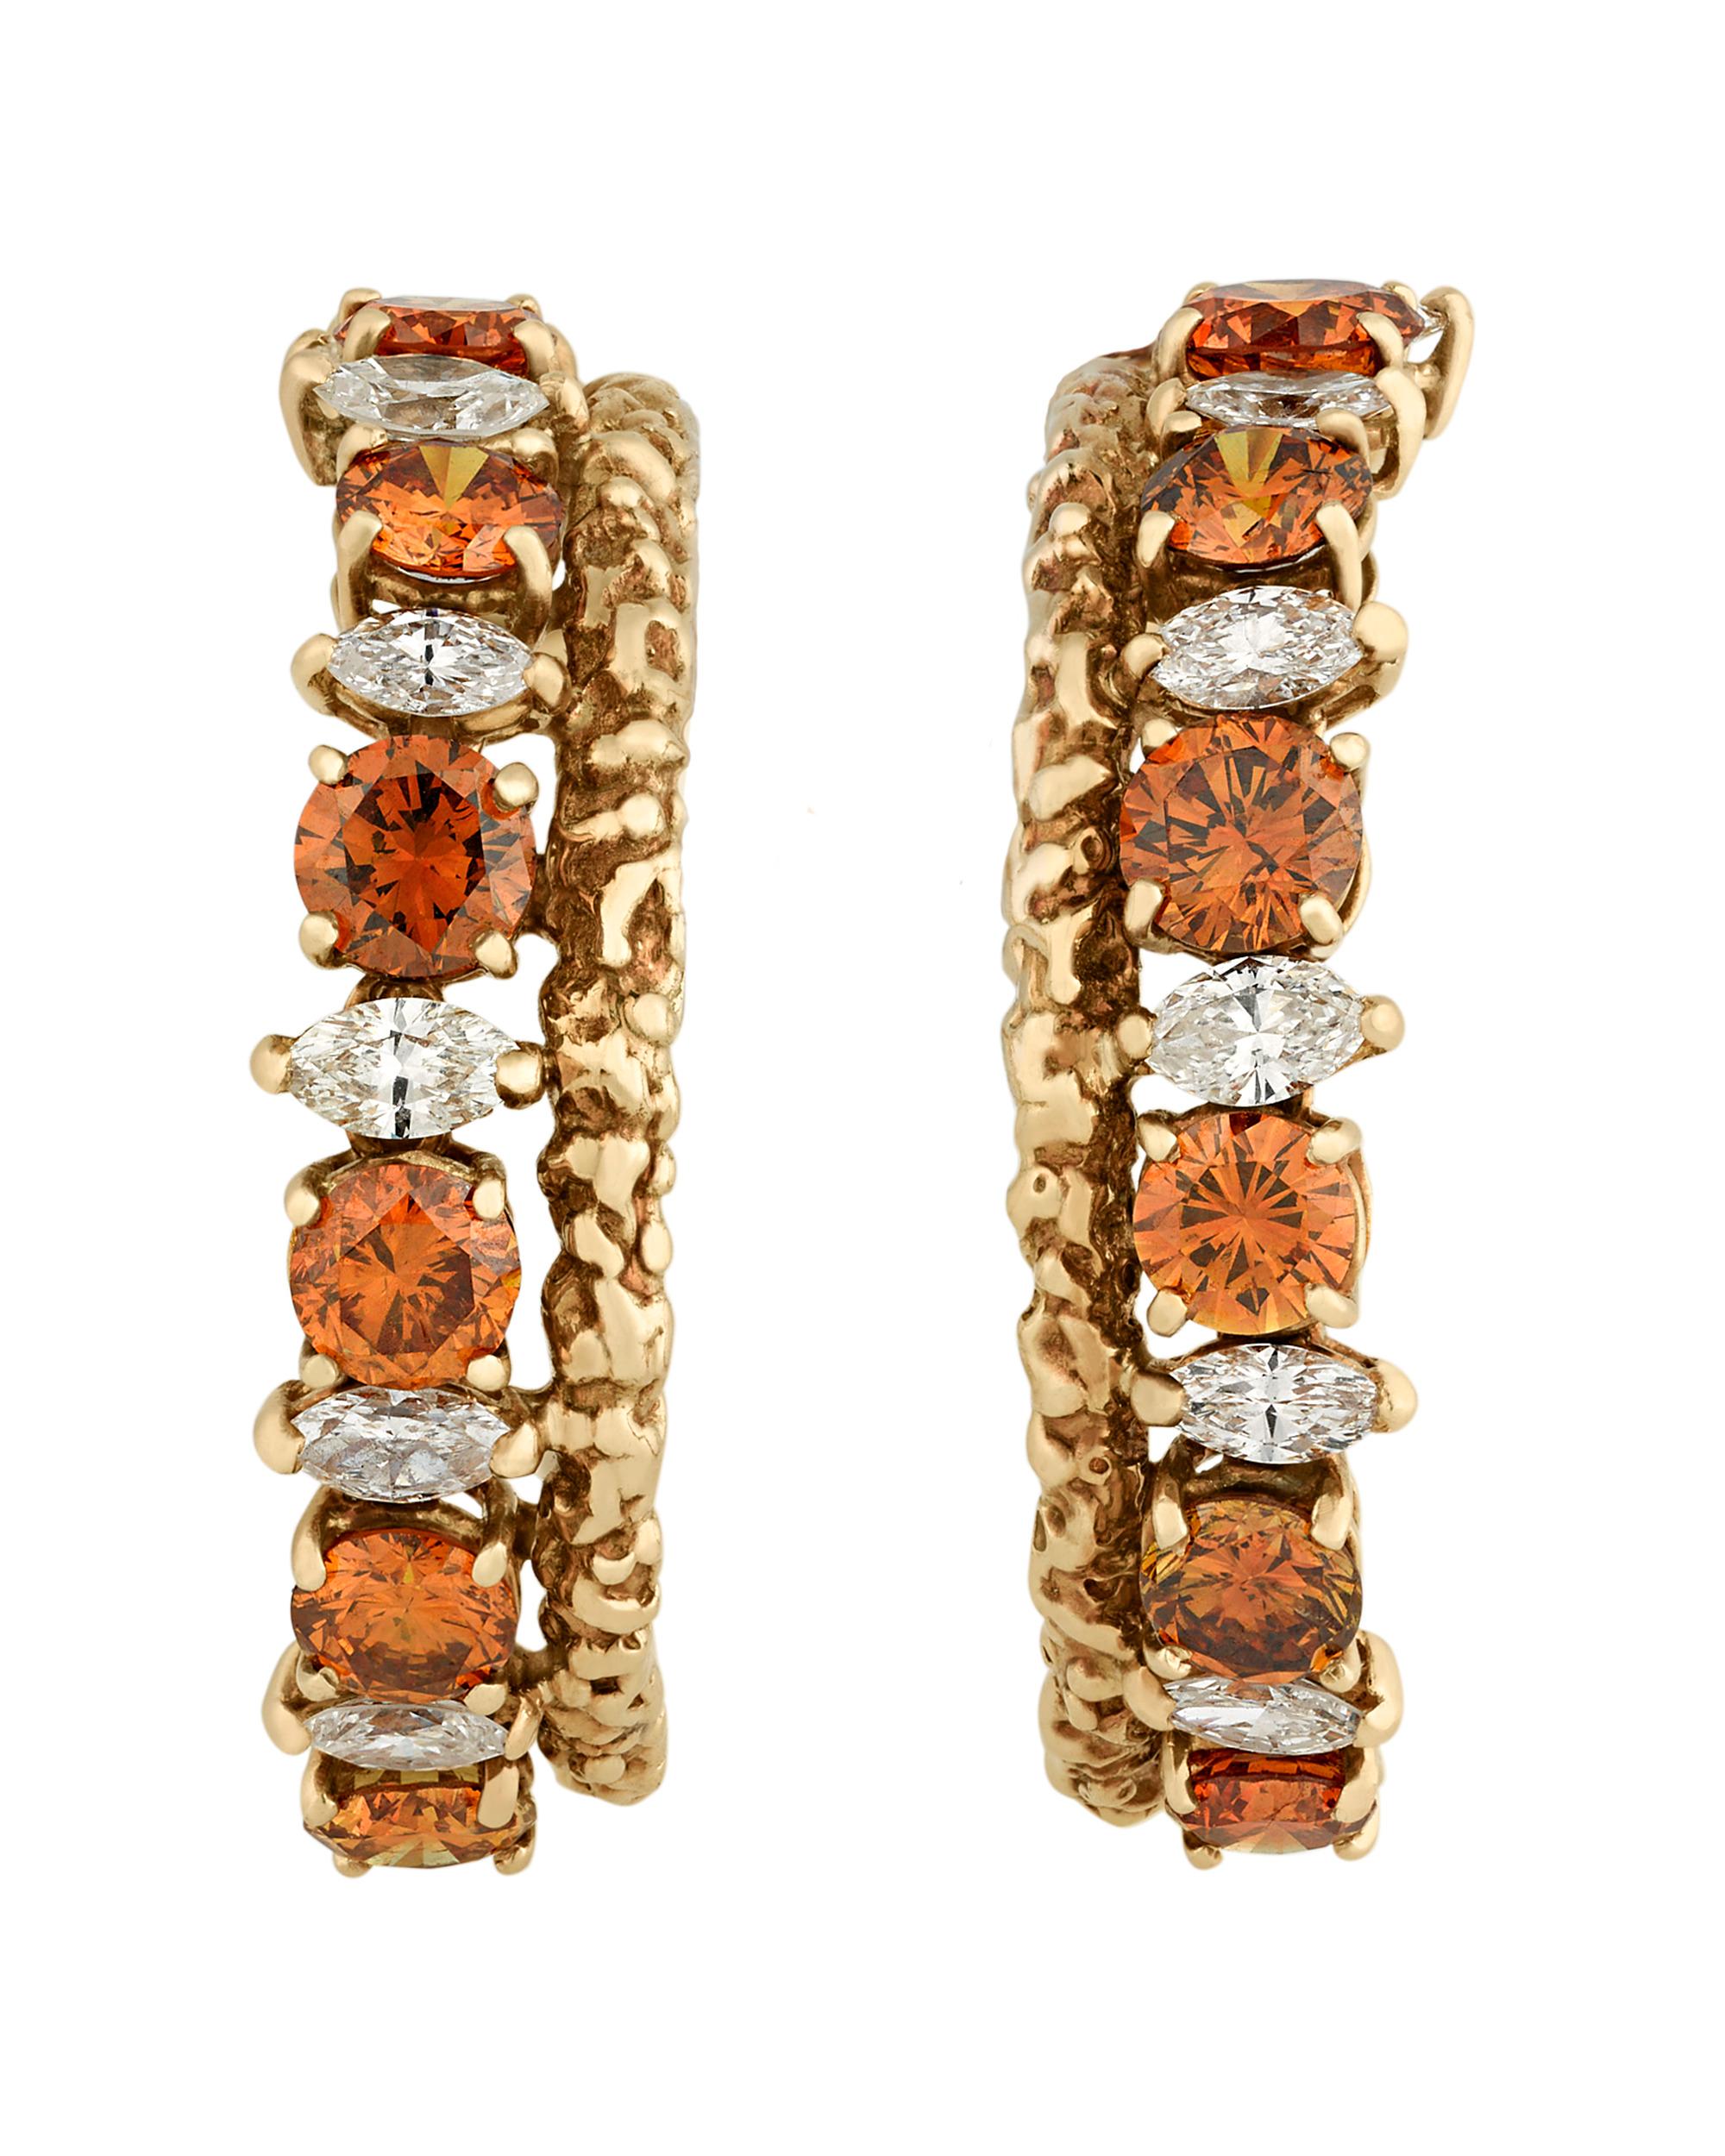 Stunning white and colored diamonds adorn these hoop earrings by the esteemed Van Cleef & Arpels. Twelve round natural brownish-orange diamonds totaling 1.00 carat are punctuated by twelve marquise-cut white diamonds totaling approximately 1.00